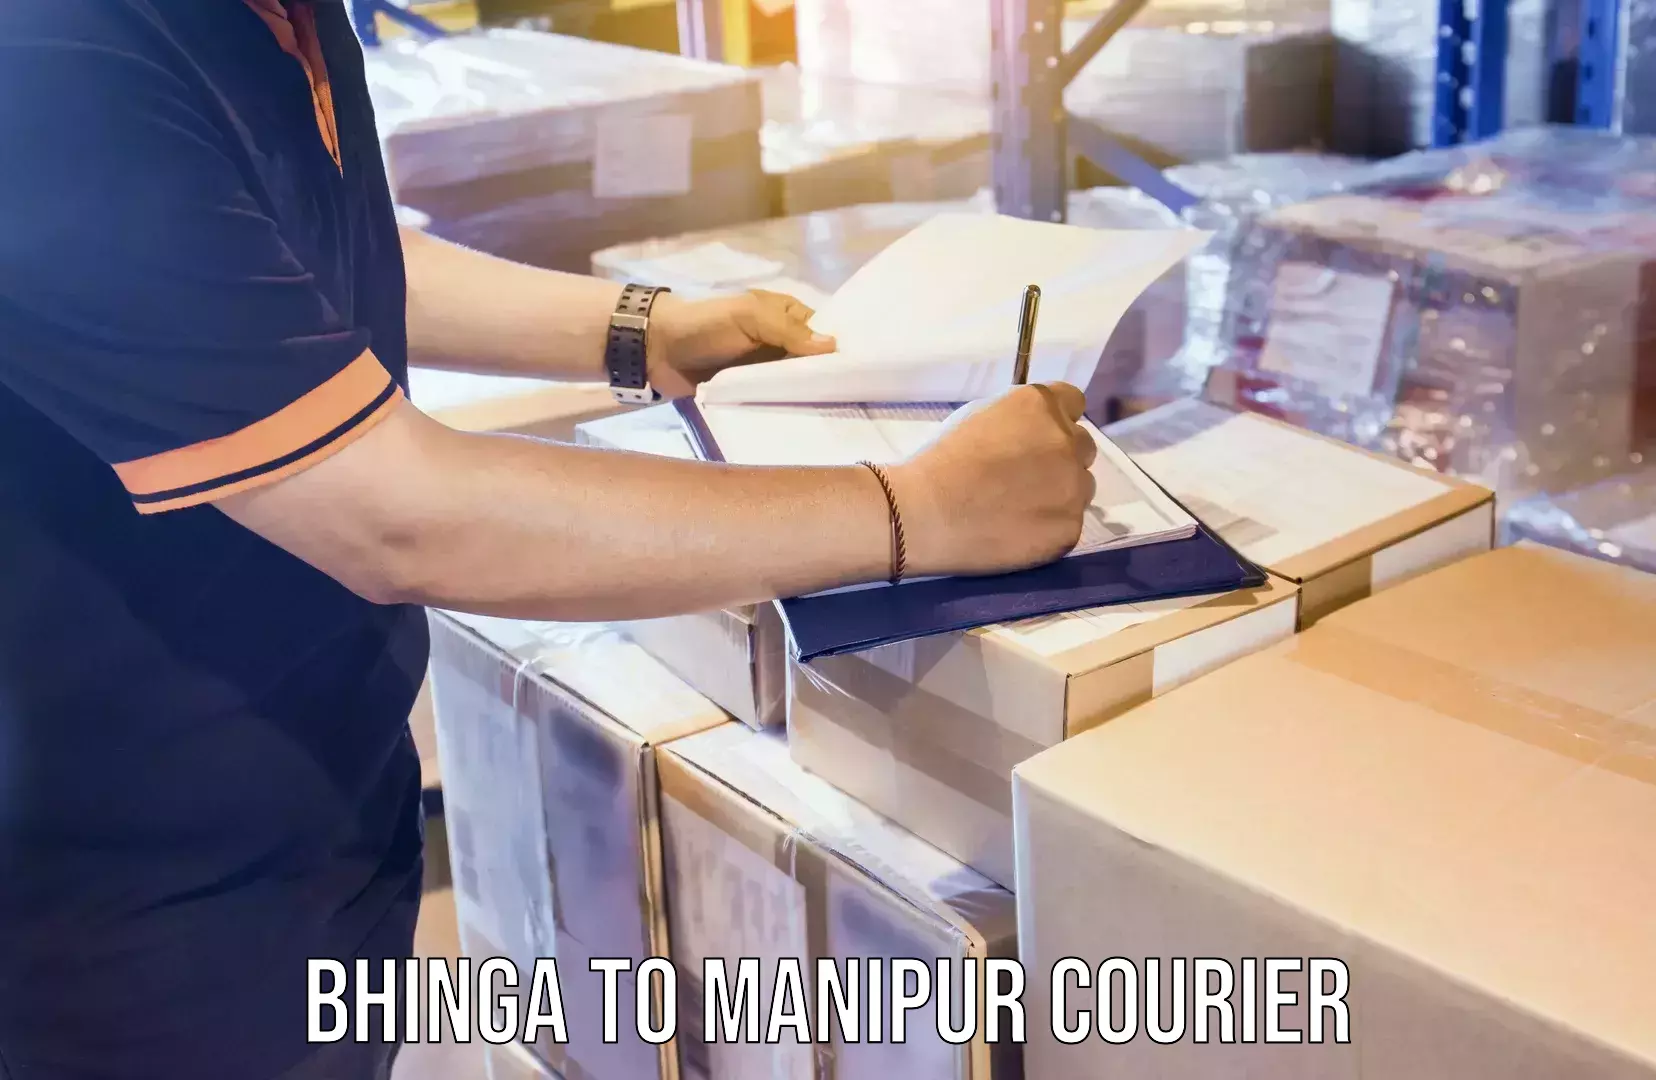 Cash on delivery service Bhinga to Manipur